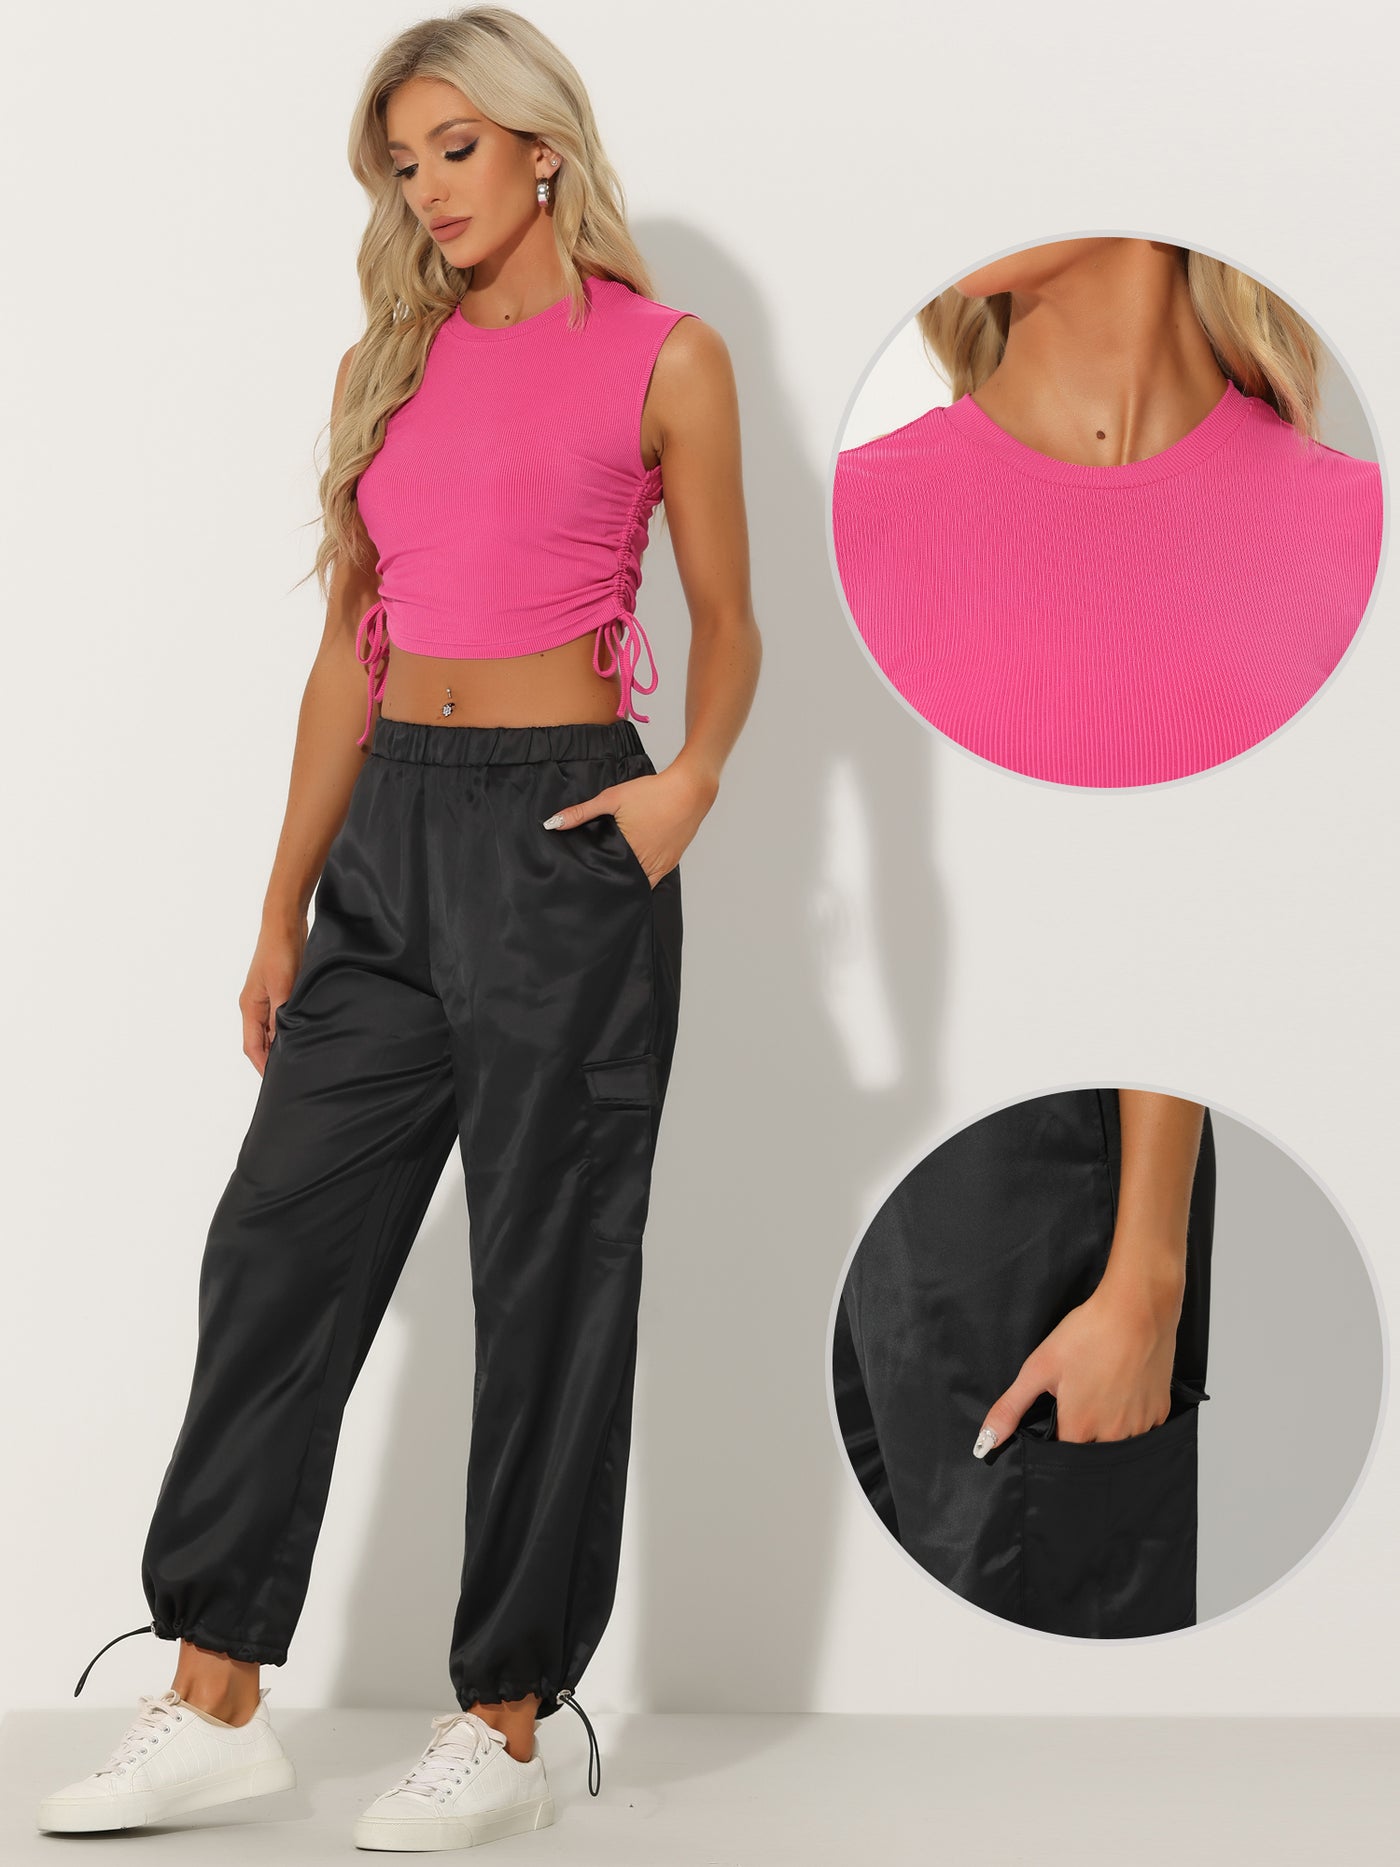 Allegra K Casual 2pc Outfits Sleeveless Tank Top Satin Cargo Pants Tracksuit